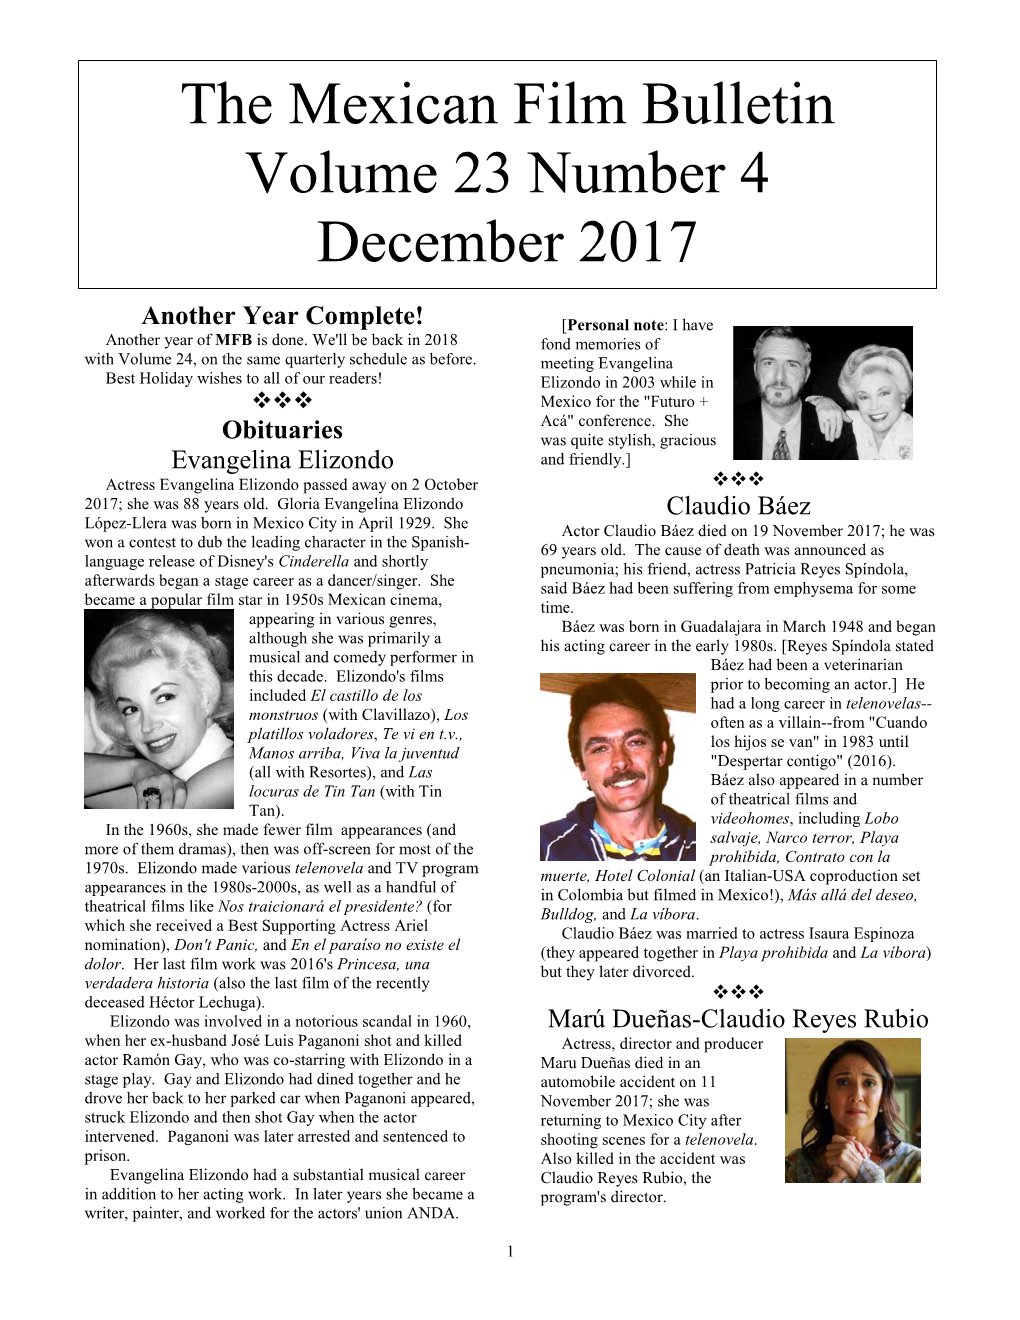 The Mexican Film Bulletin Volume 23 Number 4 December 2017